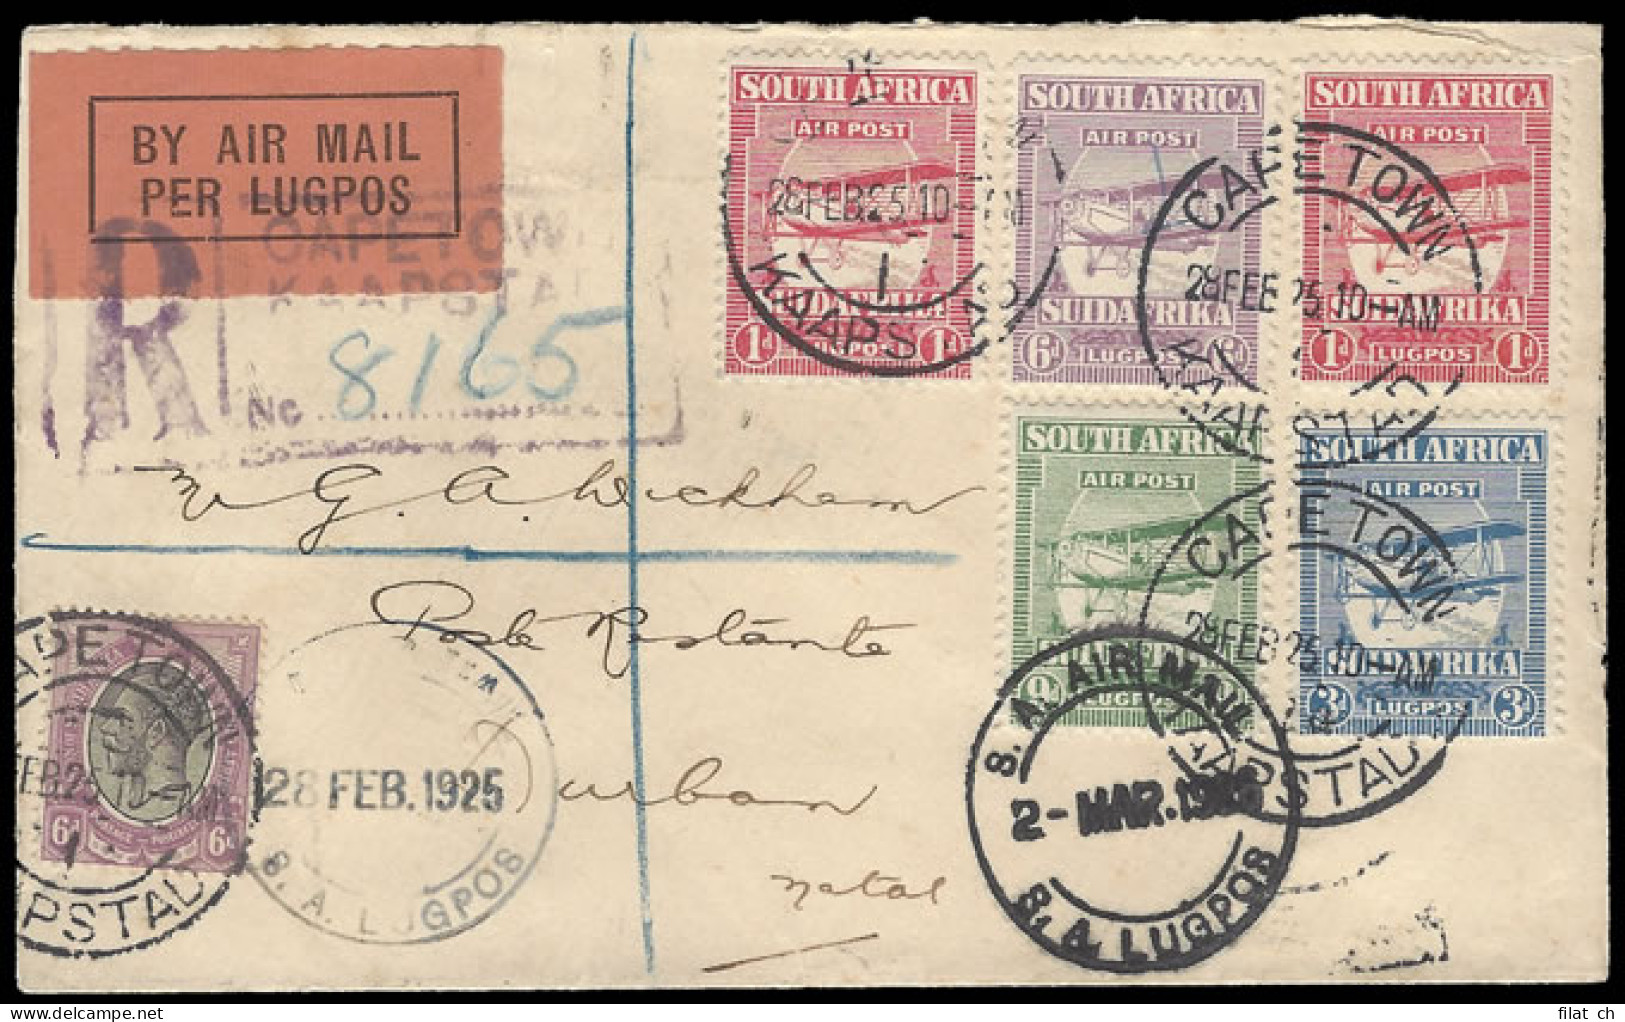 South Africa 1925 Airmails Full Set Experimental First Flight - Luftpost